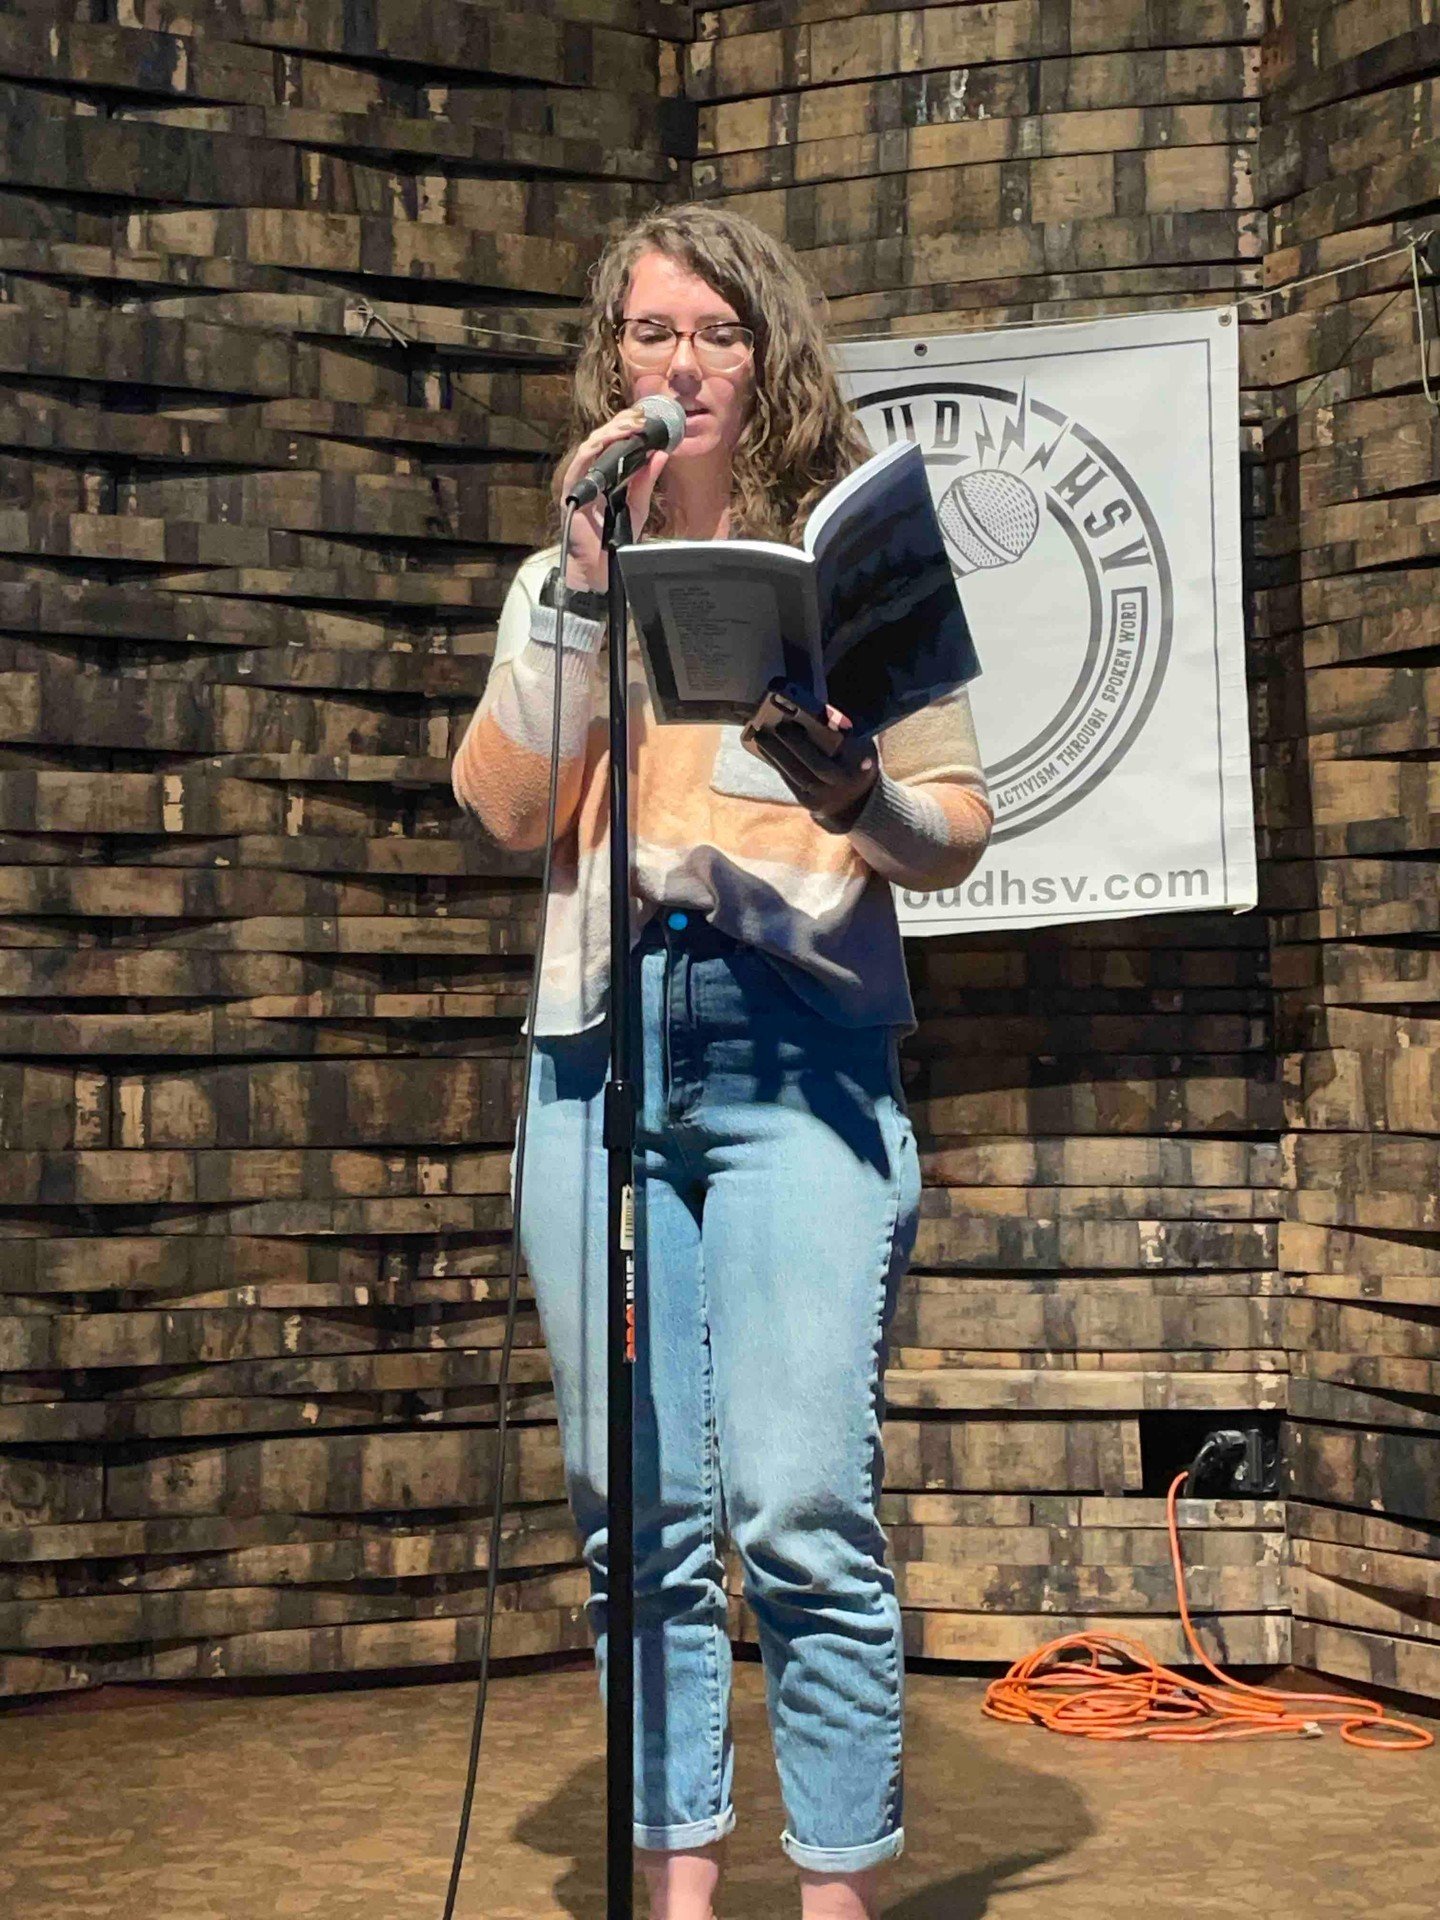 Have you heard Grace read?!
Well if you haven&rsquo;t you should!!
And on May 19th you&rsquo;ll have the perfect opportunity to with our shortened open mic followed by a special feature with Grace Dellis!!
Doors open at 6:00pm!!